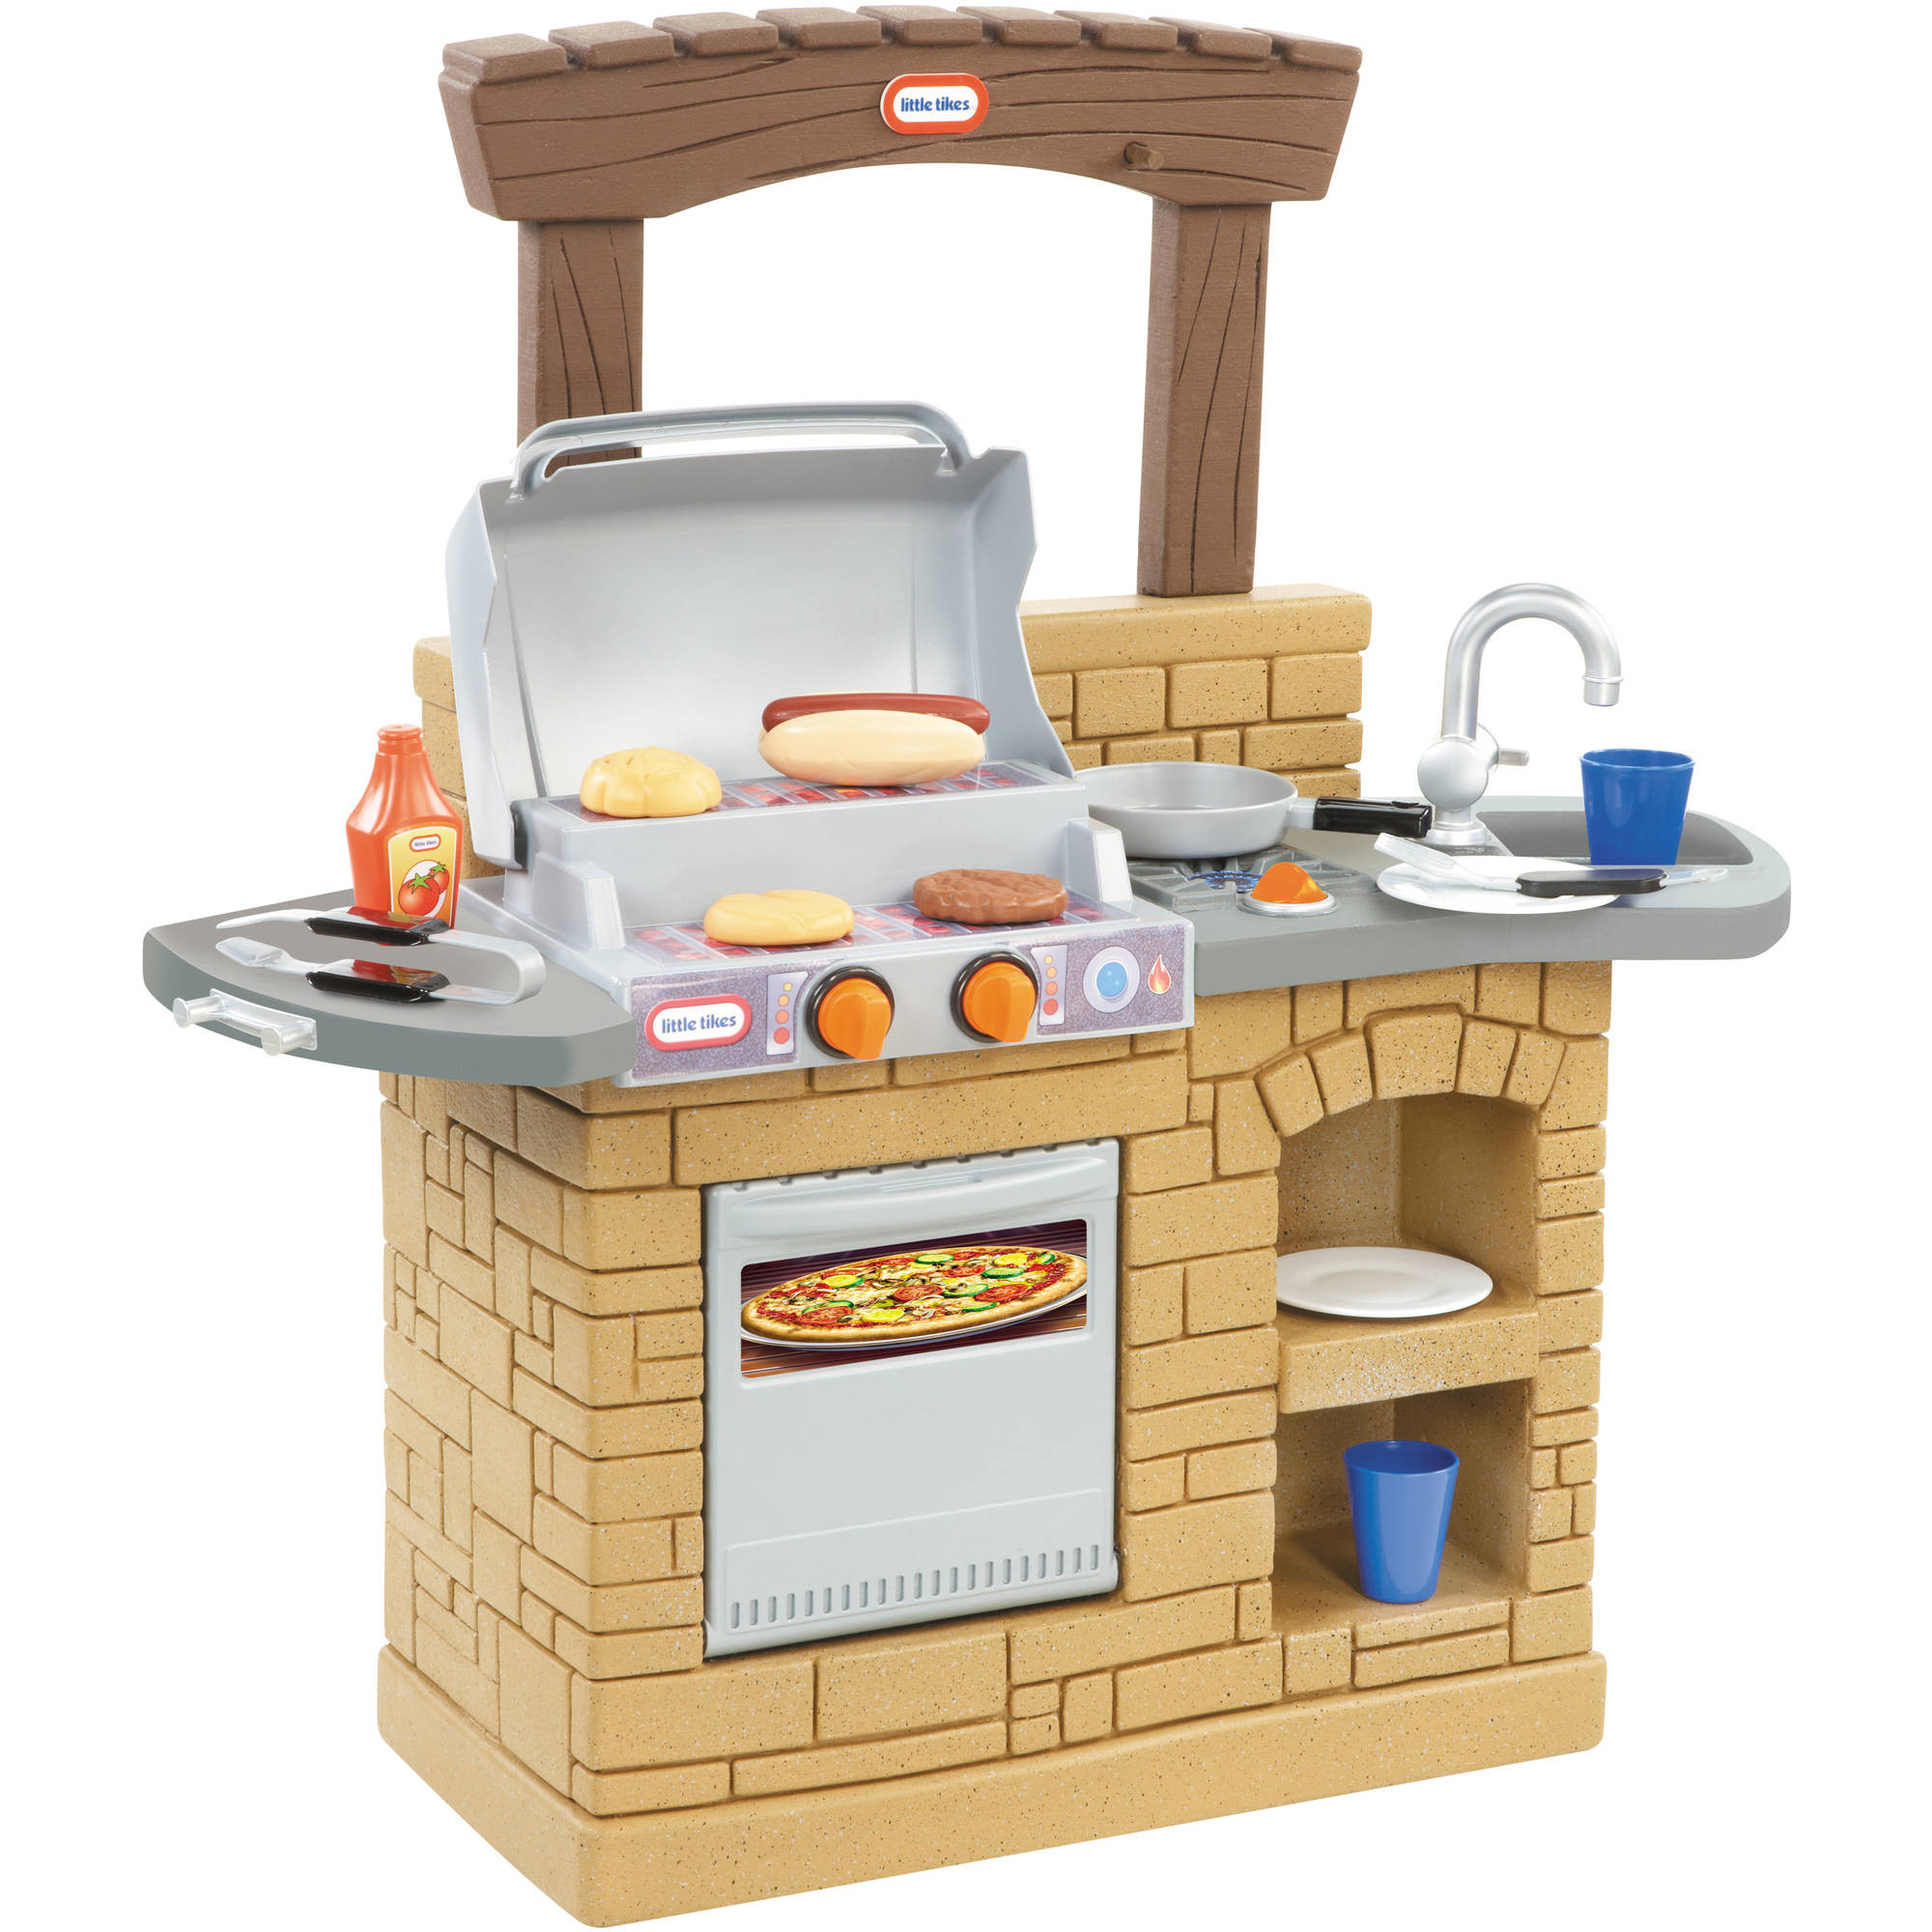 Lil Tikes Backyard Bbq
 Little Tikes Cook n Play Outdoor BBQ Grill Play Set